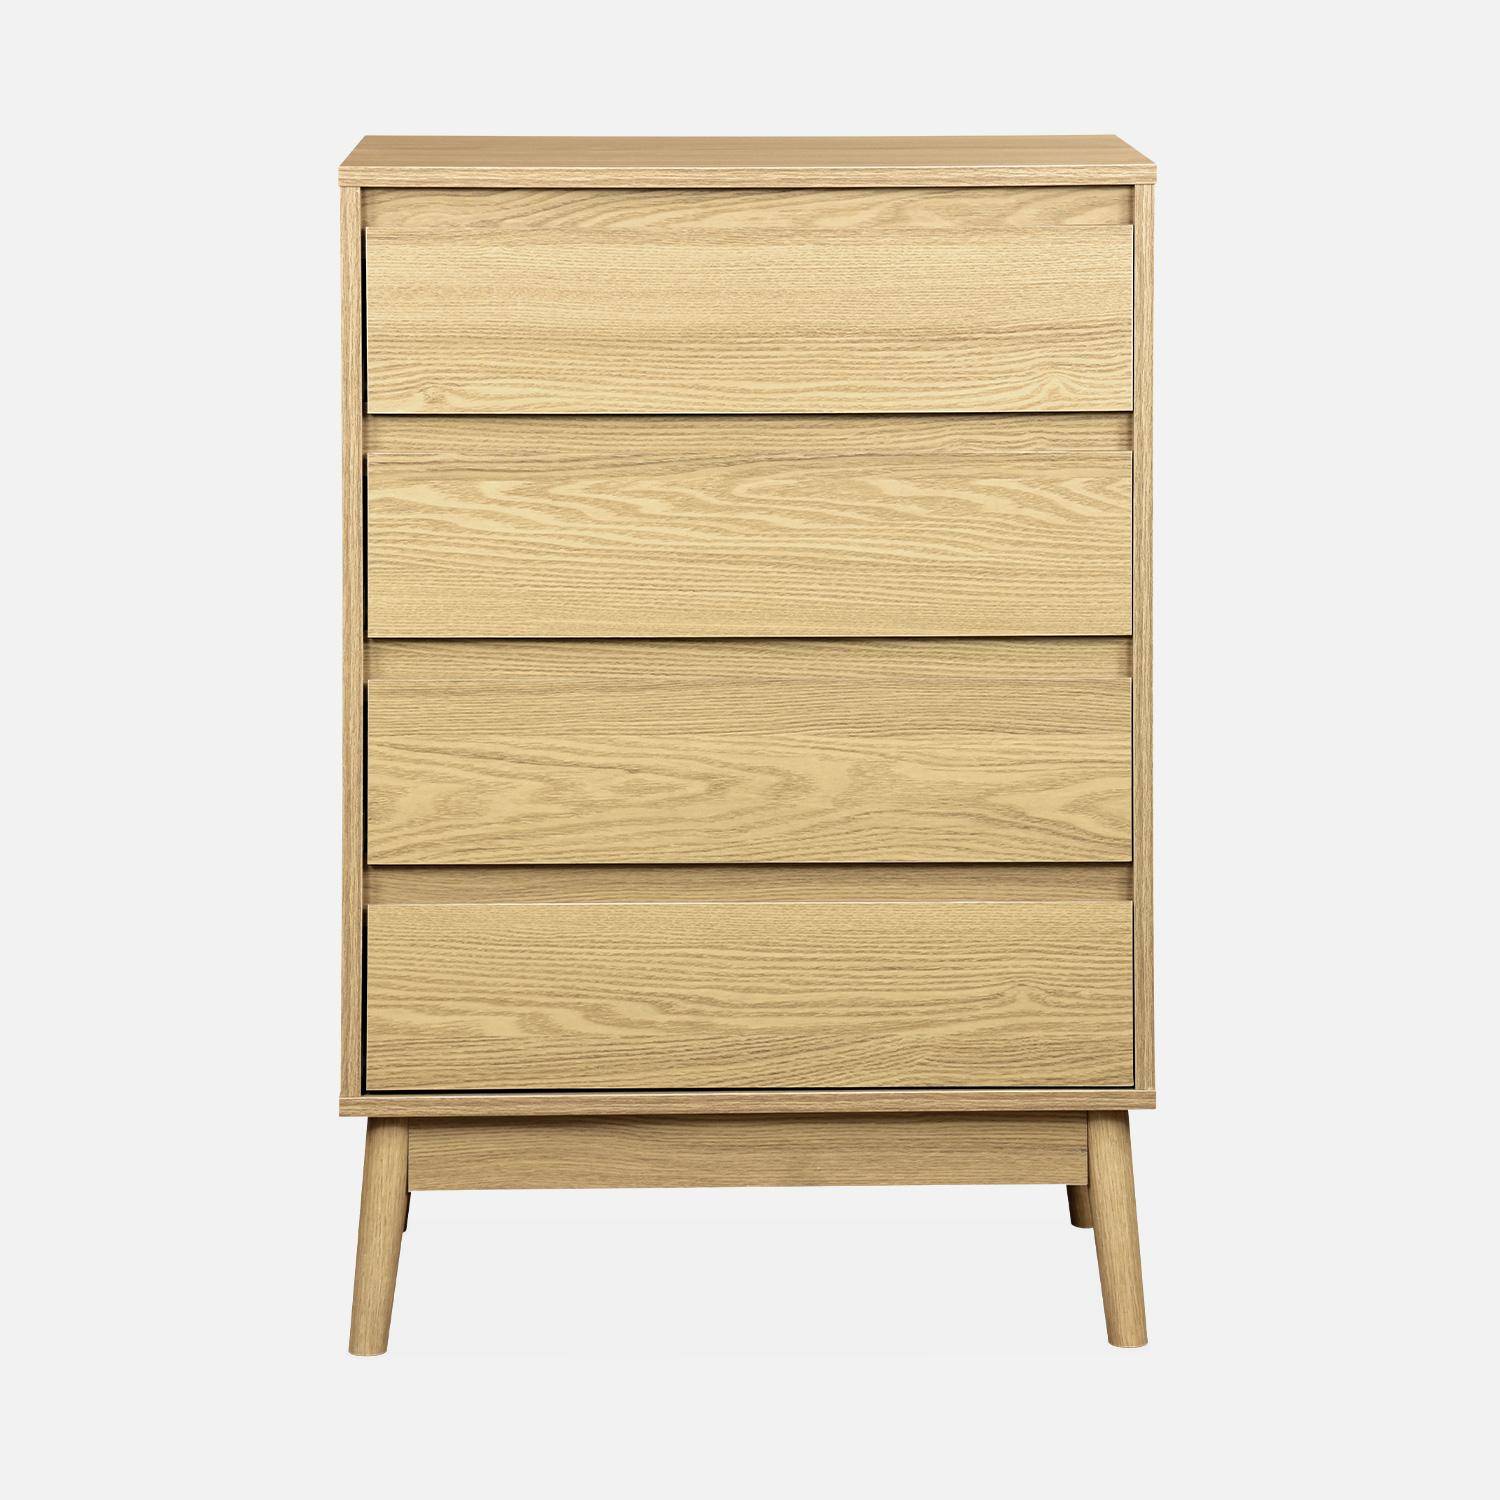 Wooden 4-drawer chest, 60x40x91cm - Dune - Natural wood colour Photo4